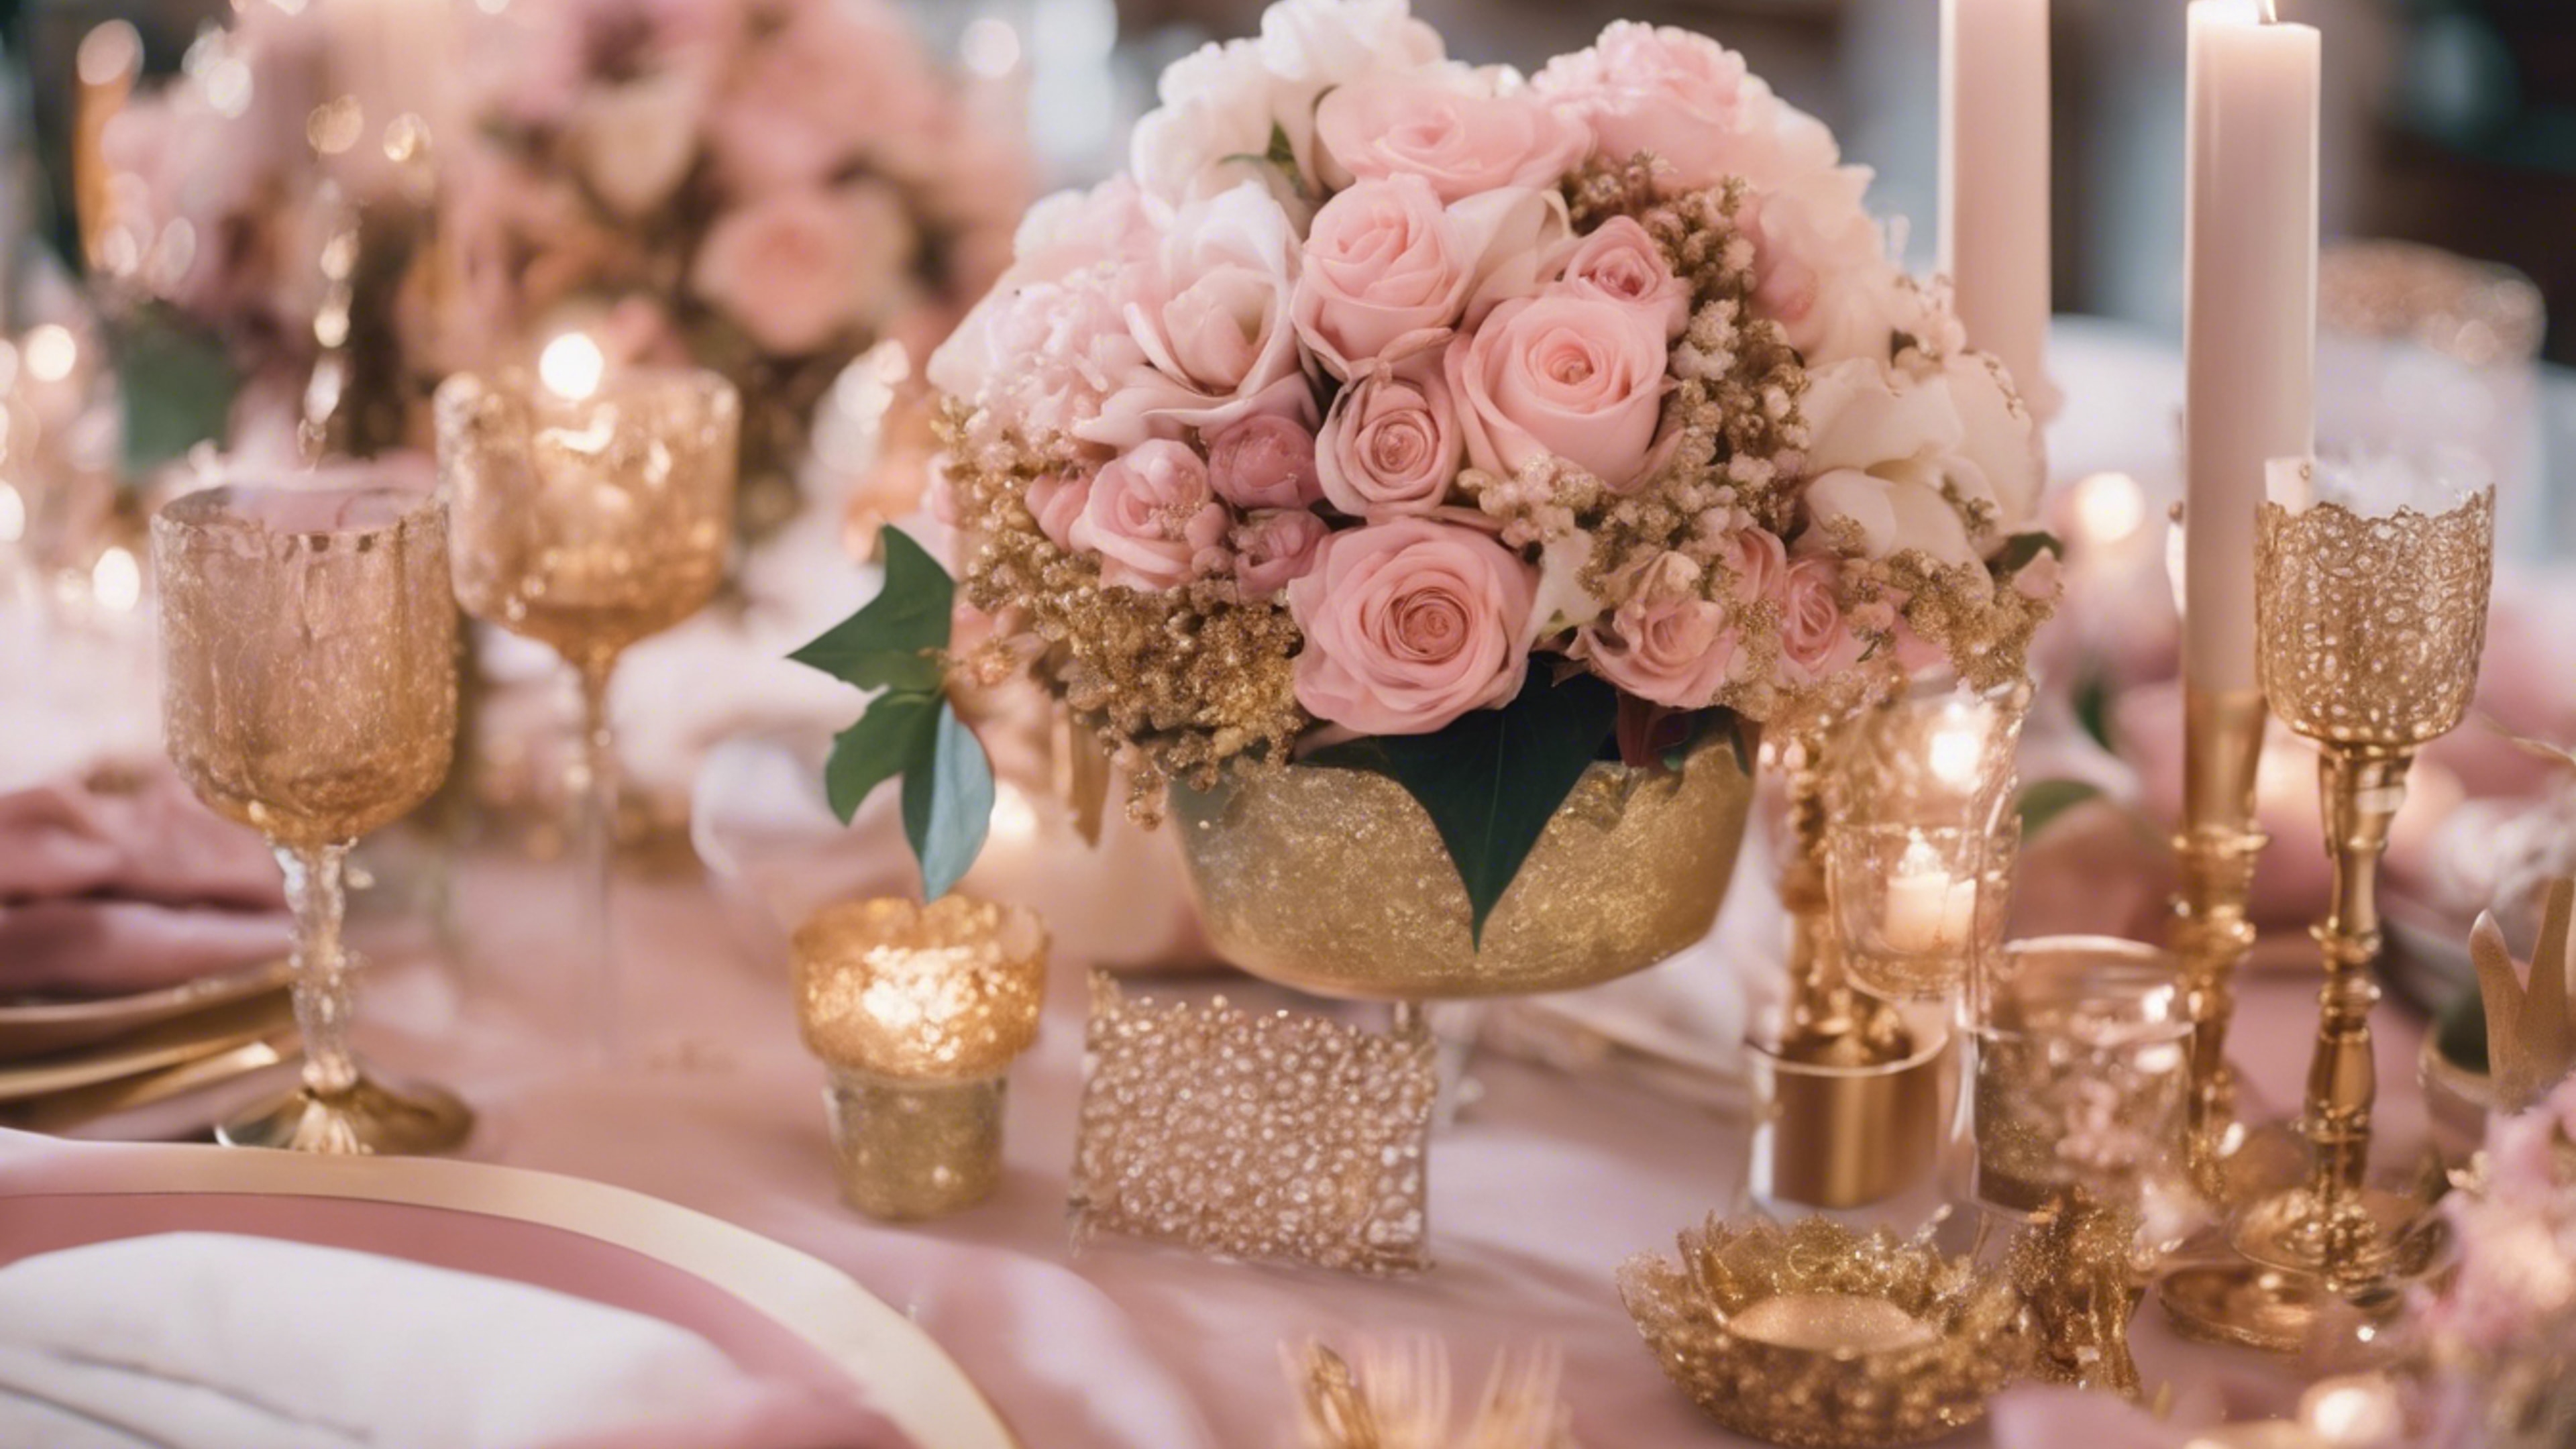 An ethereal pink and gold themed wedding decorations with flowers and metallic accents. Fondo de pantalla[814998f188fb45f48f1c]